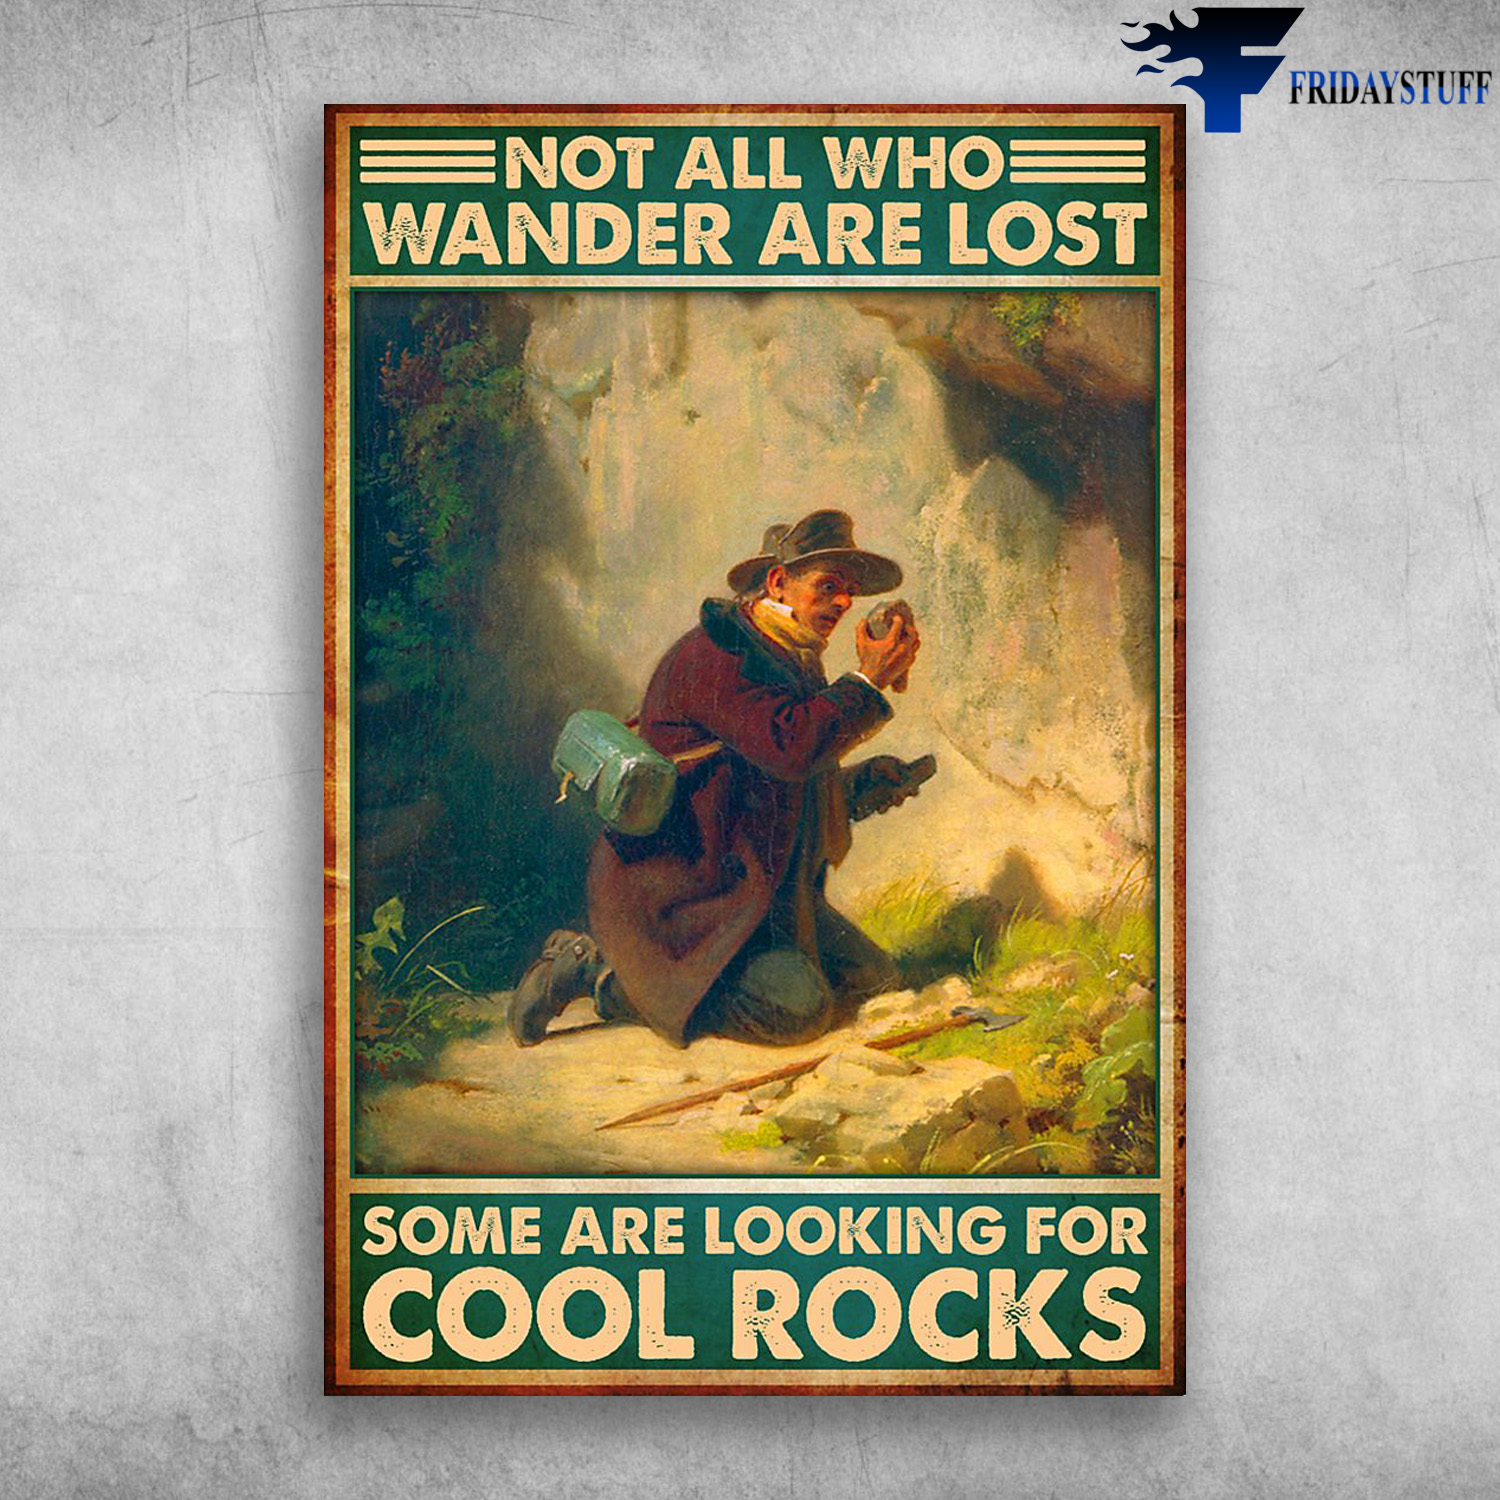 Geology Wander - Not All Who Wander Are Lost, Some Are Looking For Cool Rocks